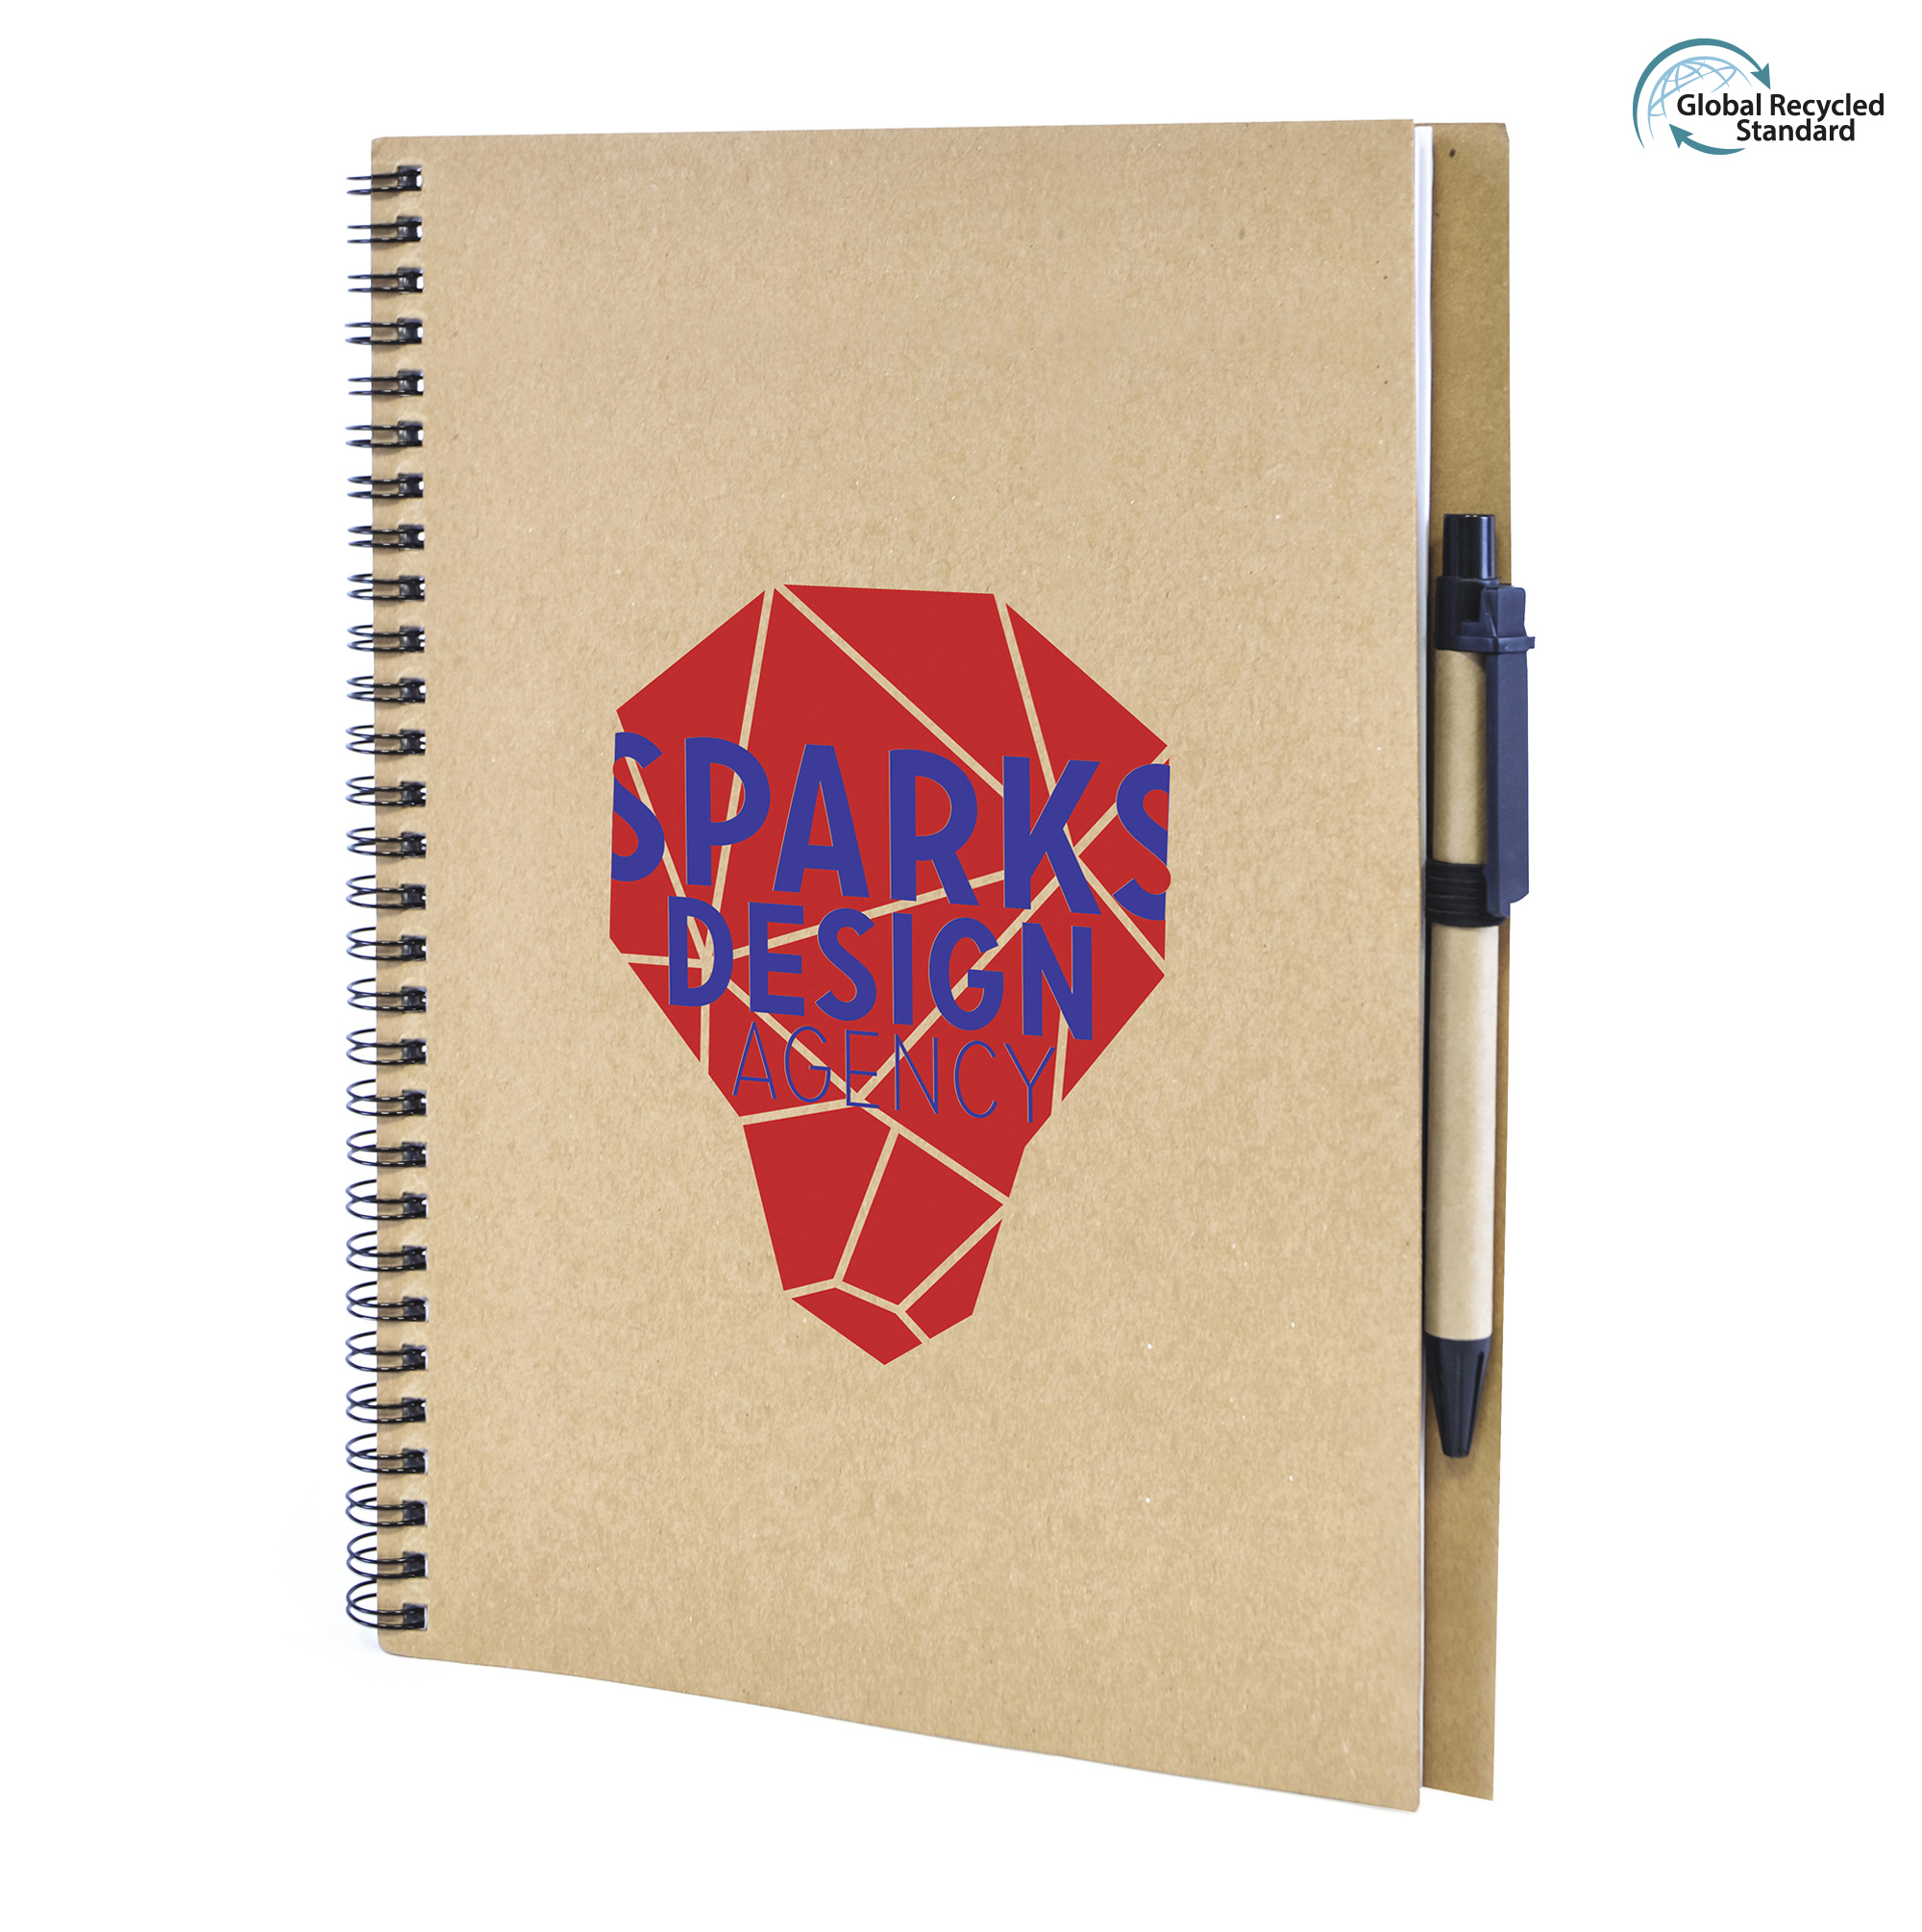 A4 Intimo Recycled Notebook